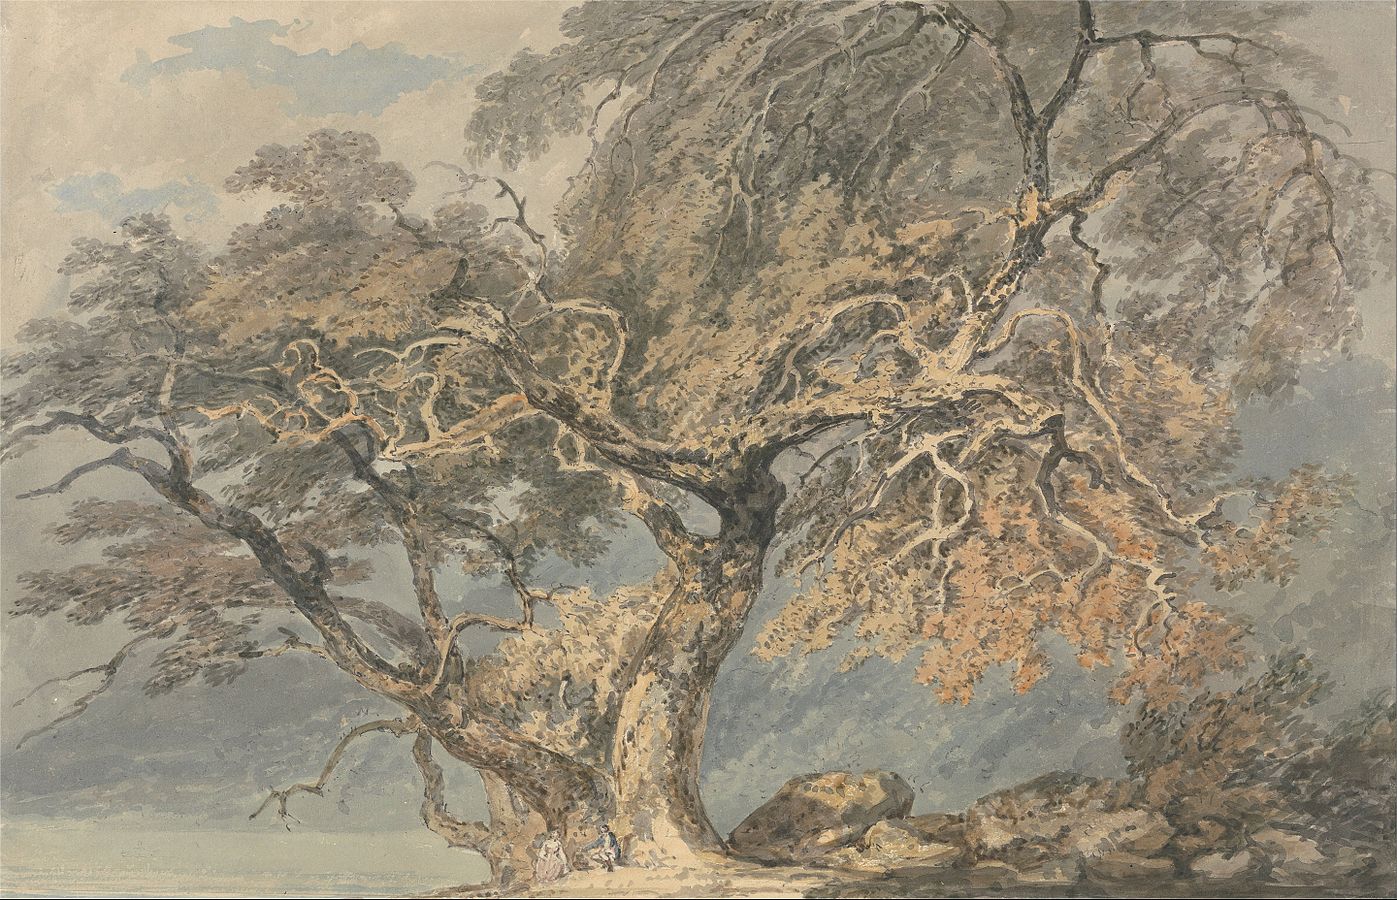 A Great Tree (1796).